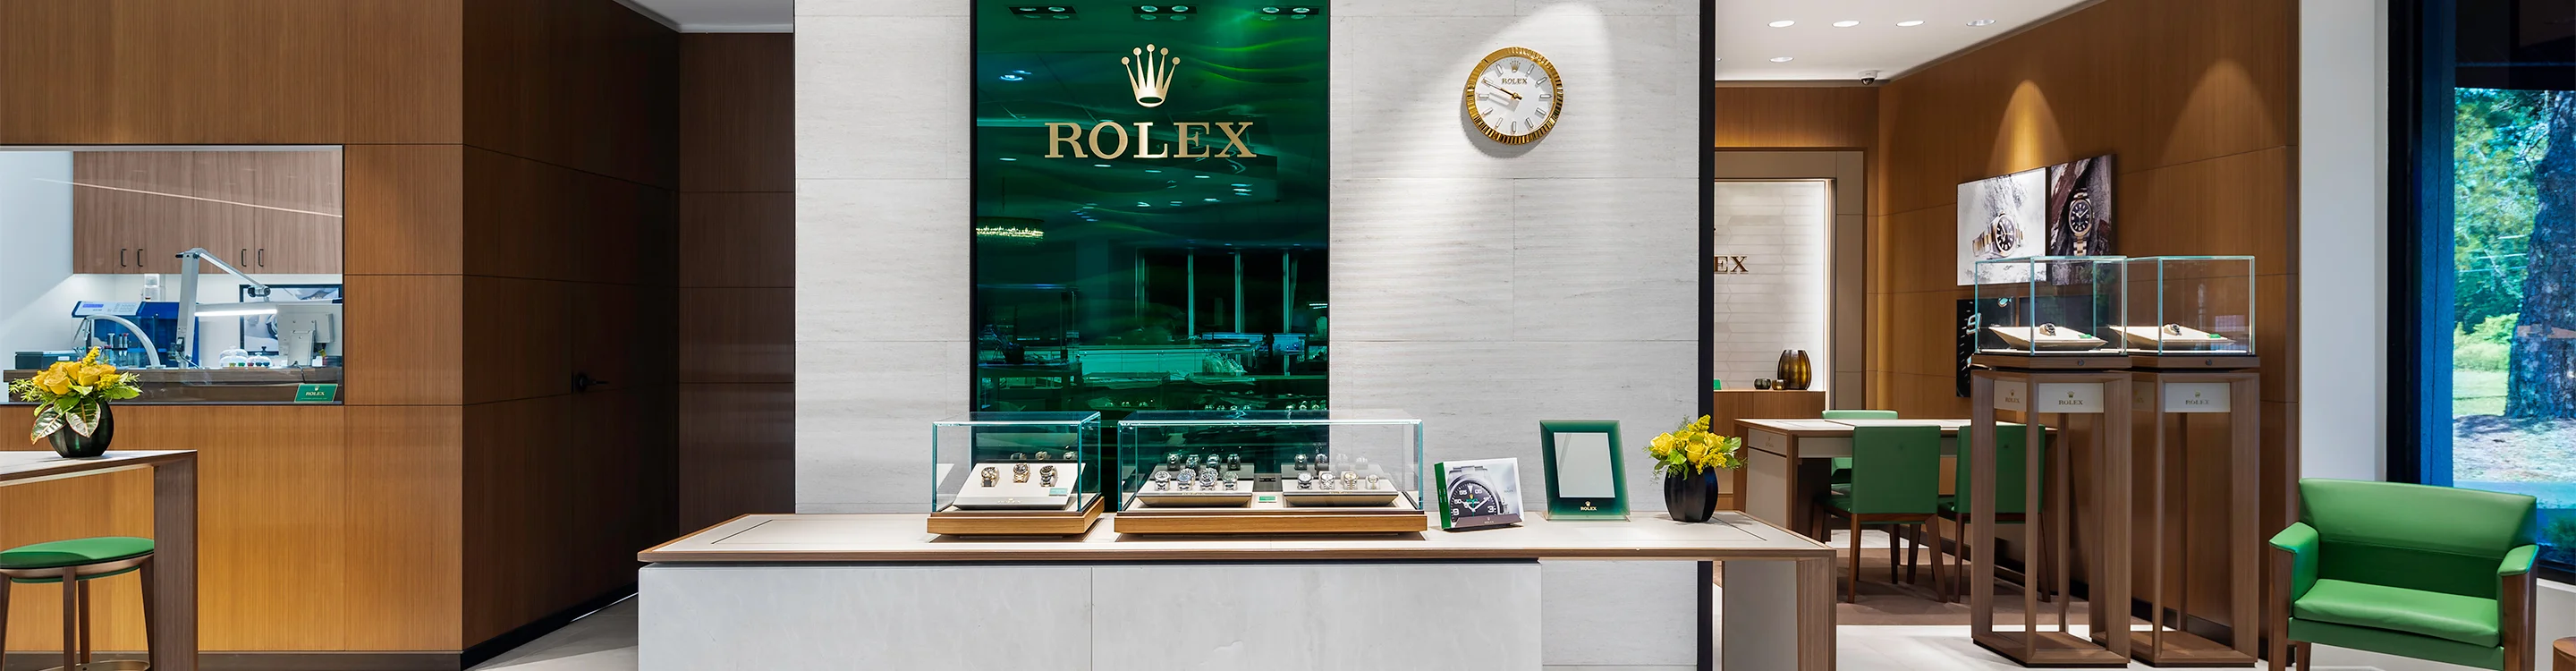 Our Rolex showroom